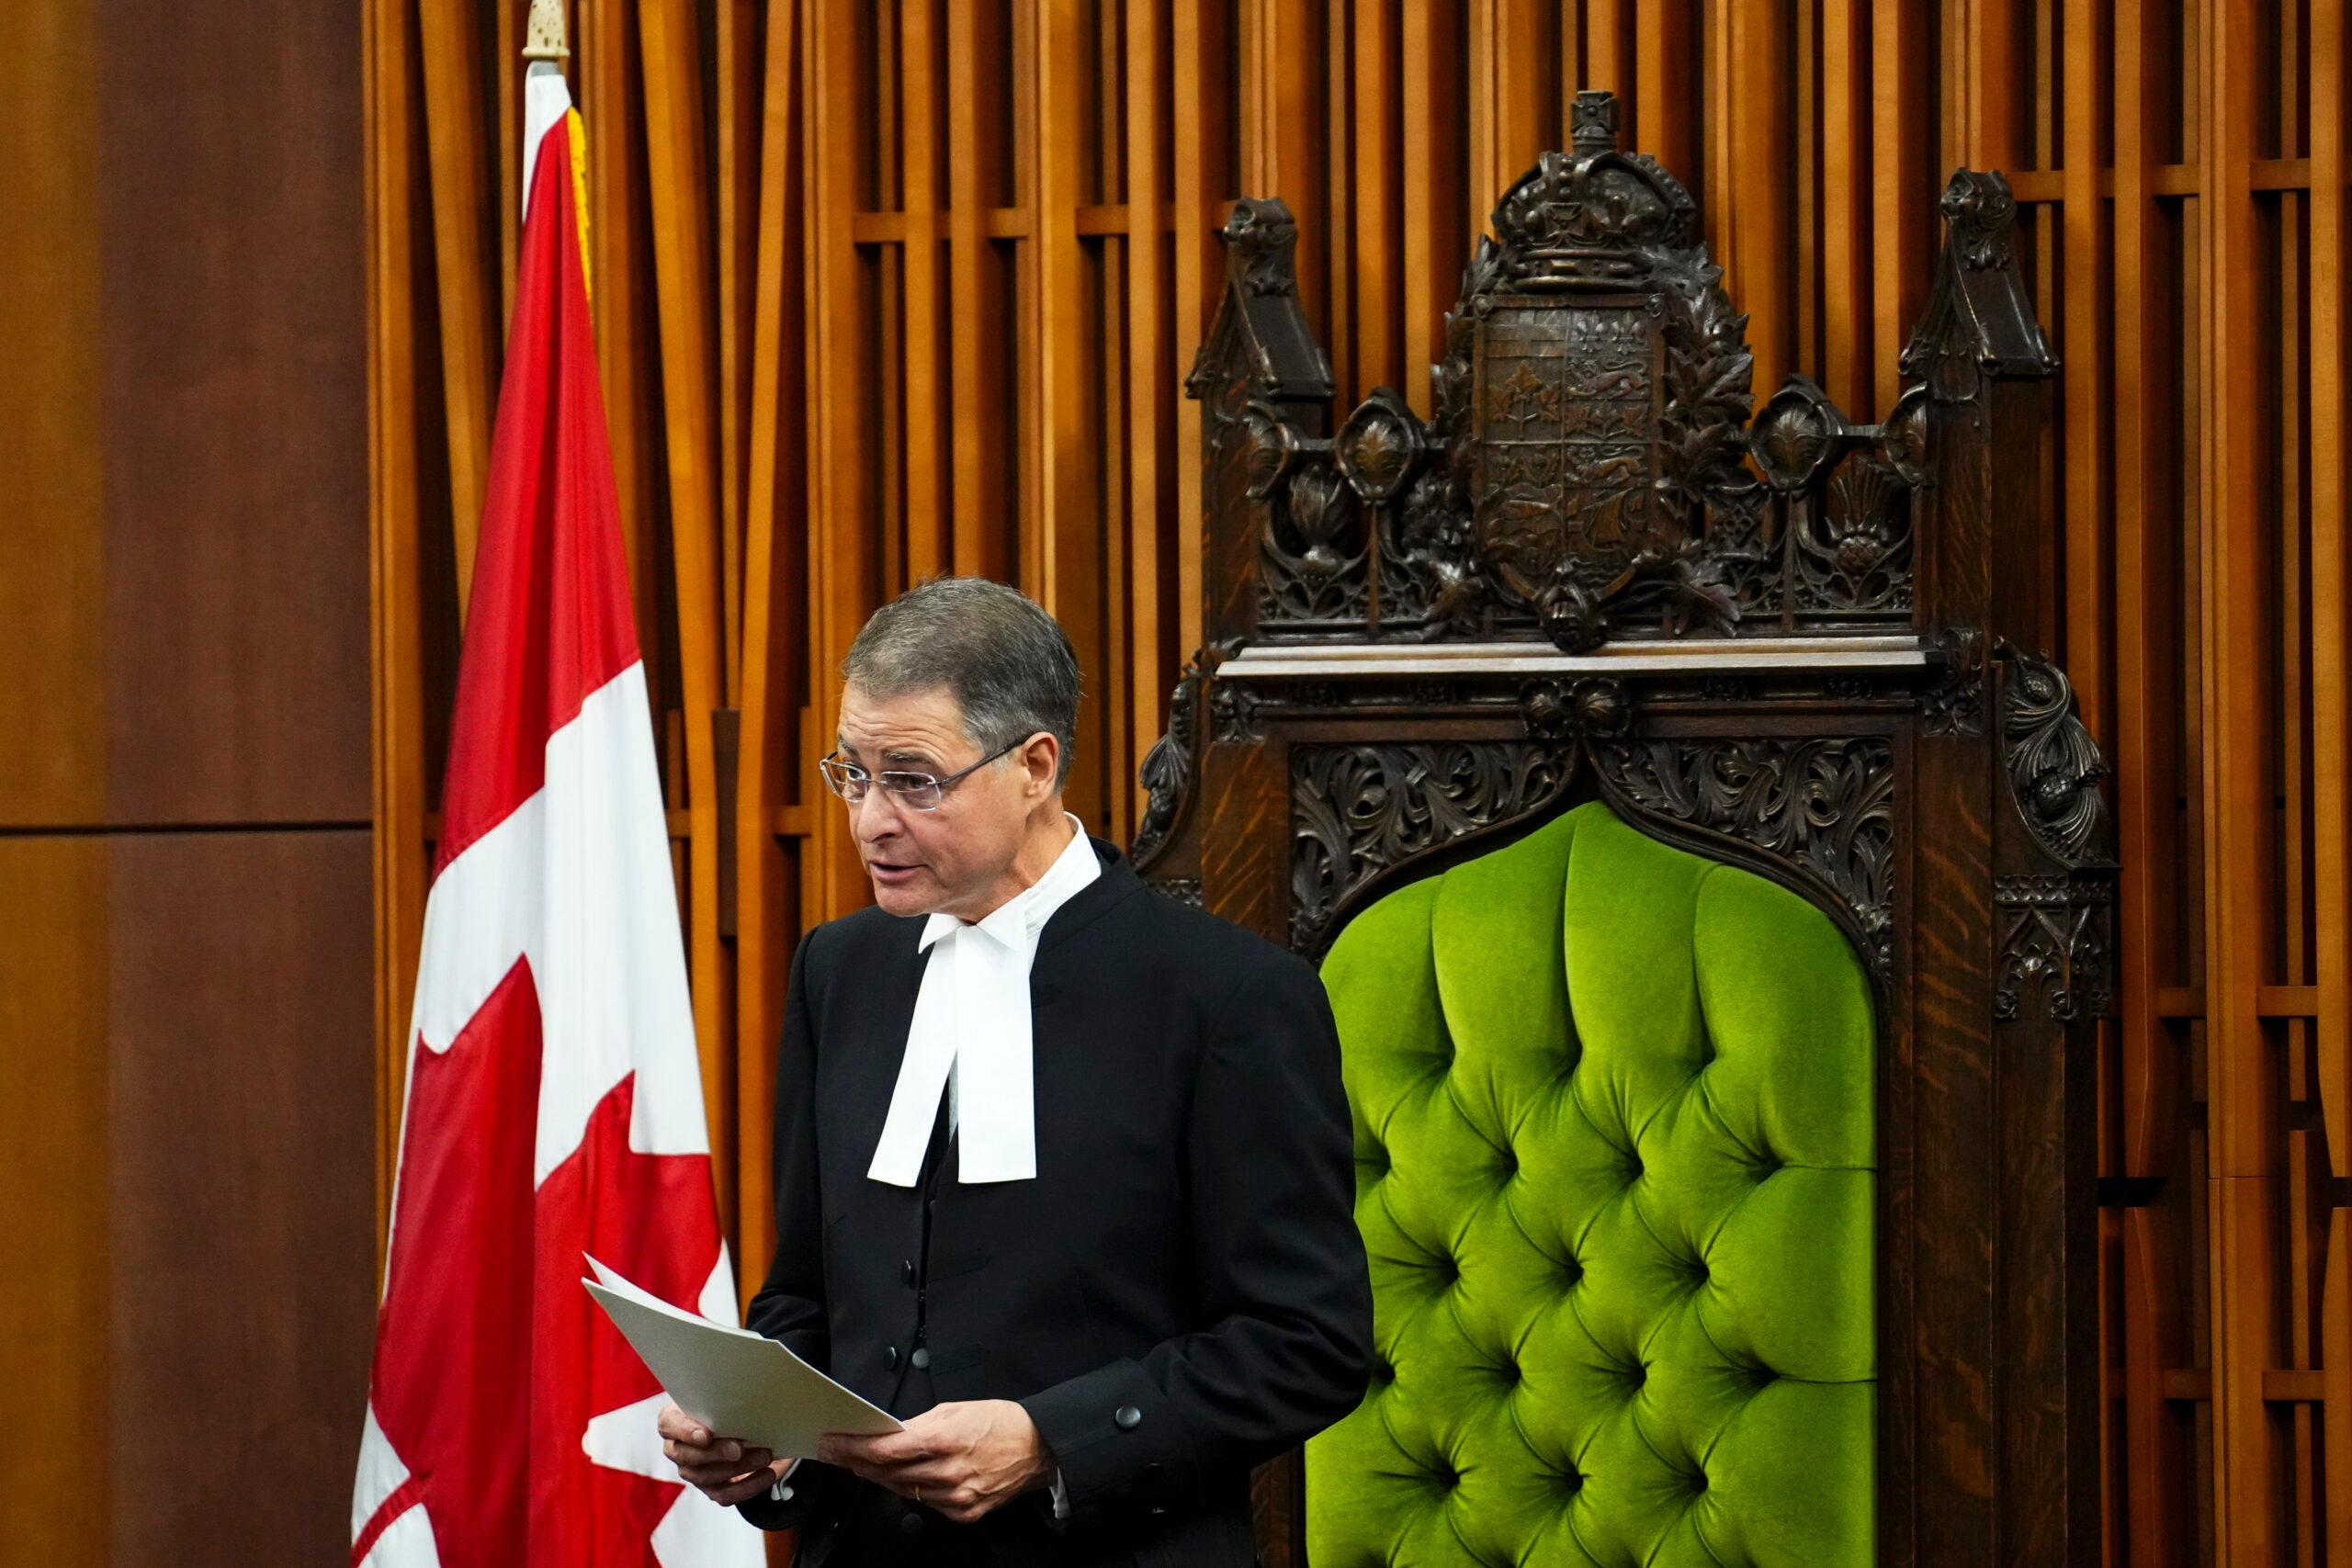 The Speaker of the House of Commons Anthony Rota delivers a speech following an address by Ukrainian President Volodymyr Zelenskyy in the House of Commons on Parliament Hill in Ottawa on Friday, Sept. 22, 2023.